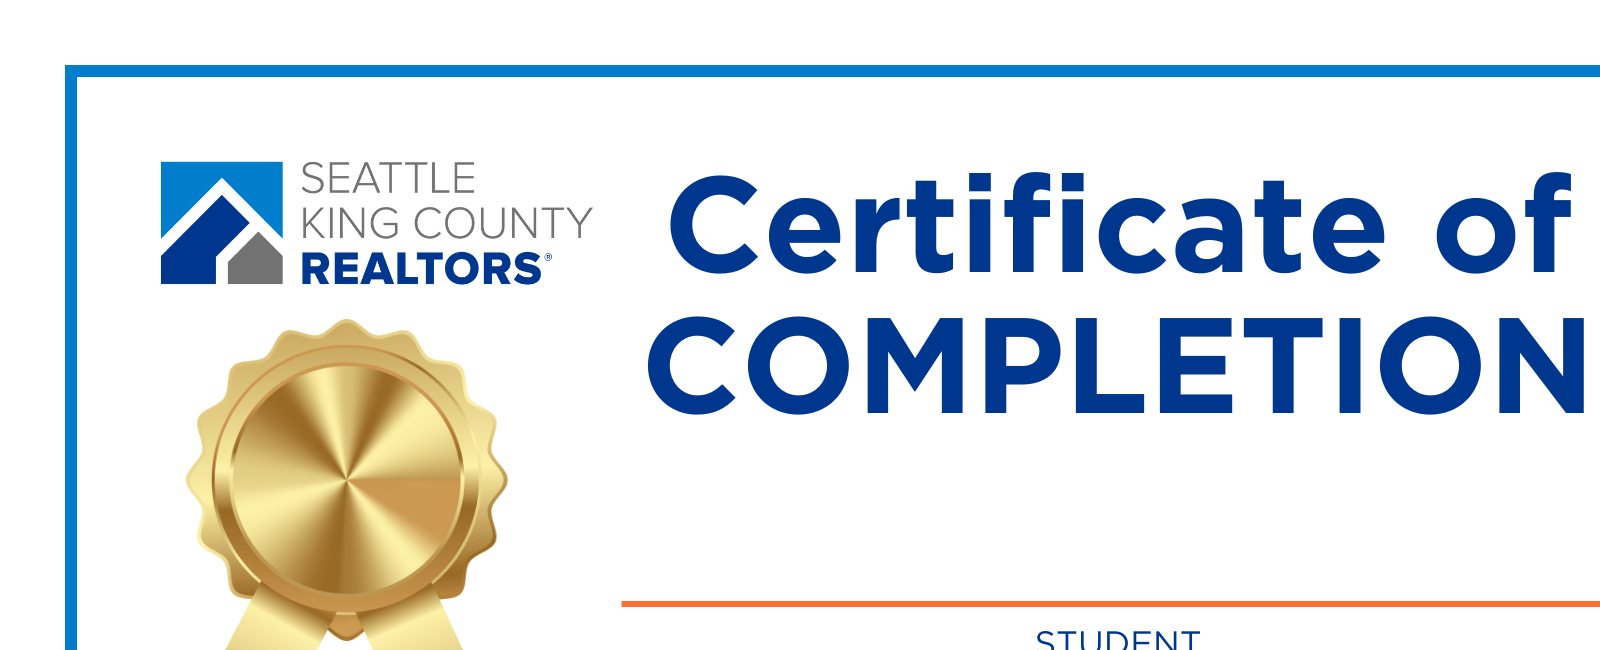 Certificate of COMPLETION 1600x650